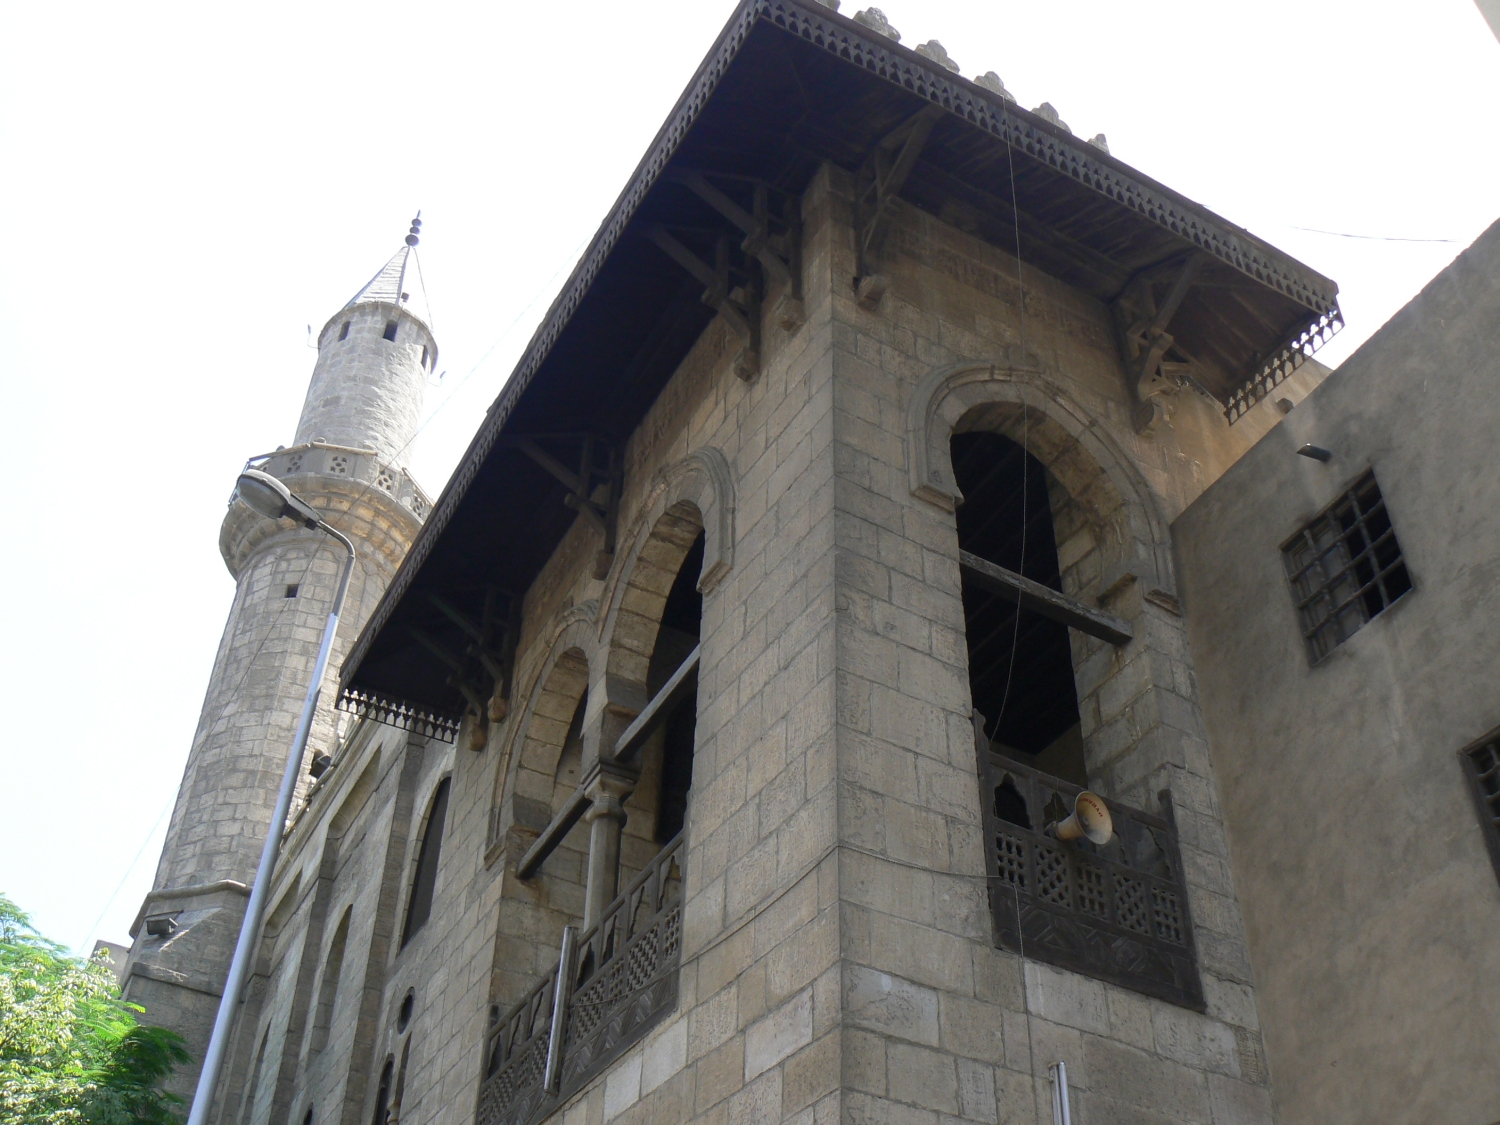 Upwards exterior view of the sabil-kuttab and minaret